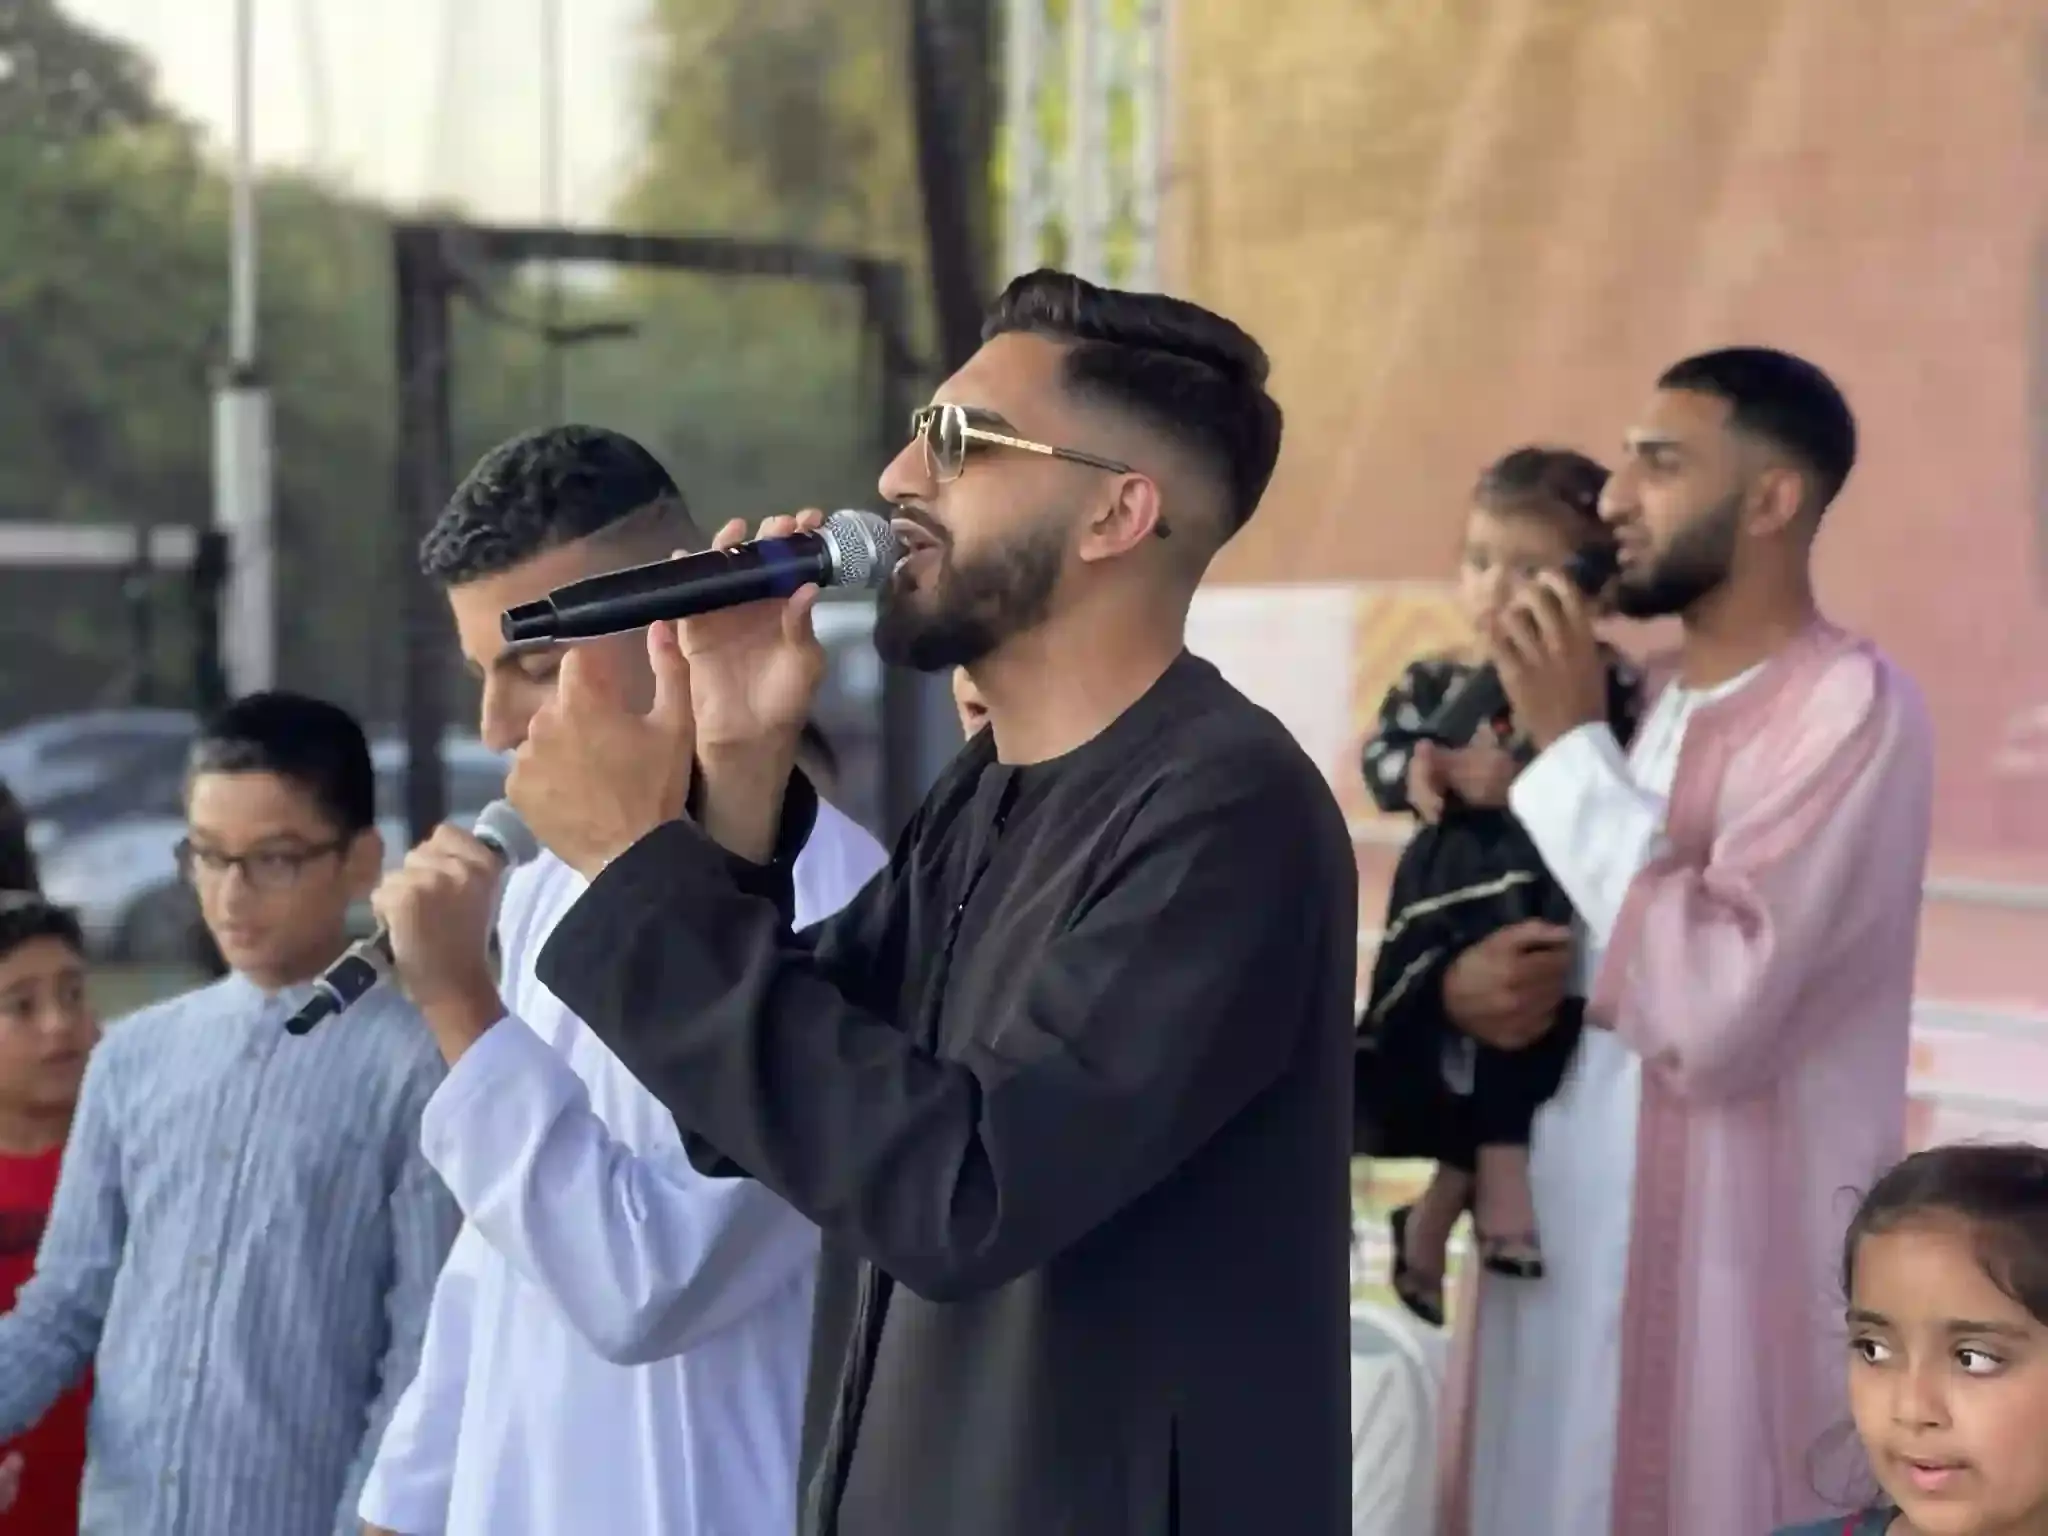 TENS OF THOUSANDS ATTEND “AFFORDABLE” EID FESTIVAL IN LUTON